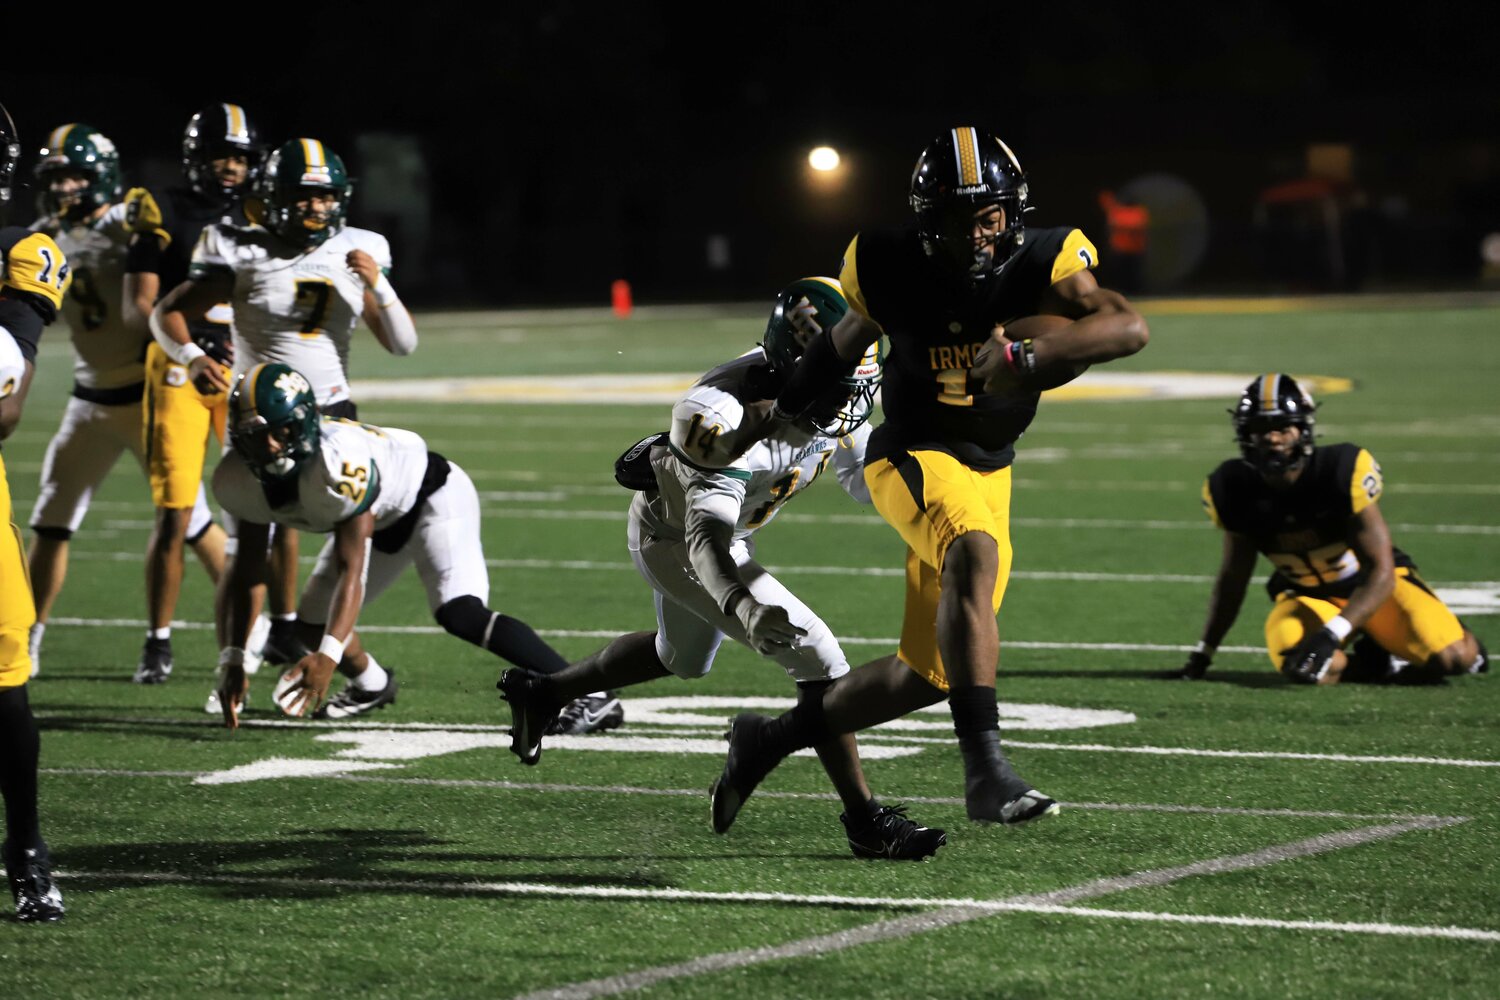 The Irmo Yellow Jackets beat Myrtle Beach Friday 55-24 in the second round of the 4A South Carolina High School League football playoffs. 